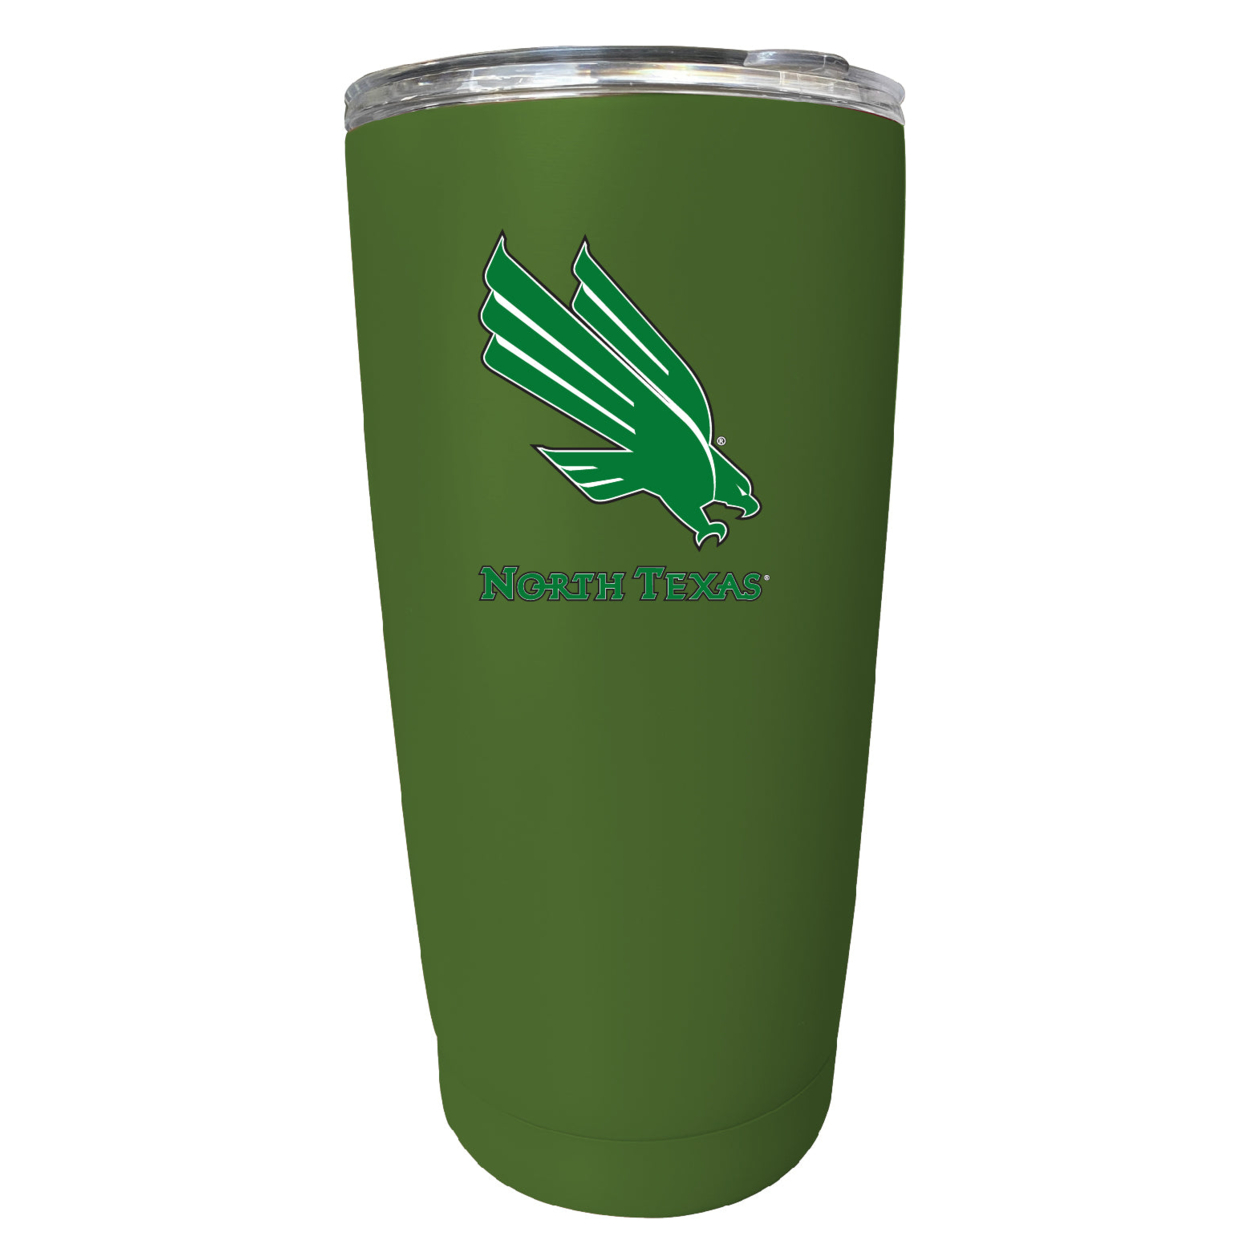 North Texas 16 Oz Stainless Steel Insulated Tumbler - Gray